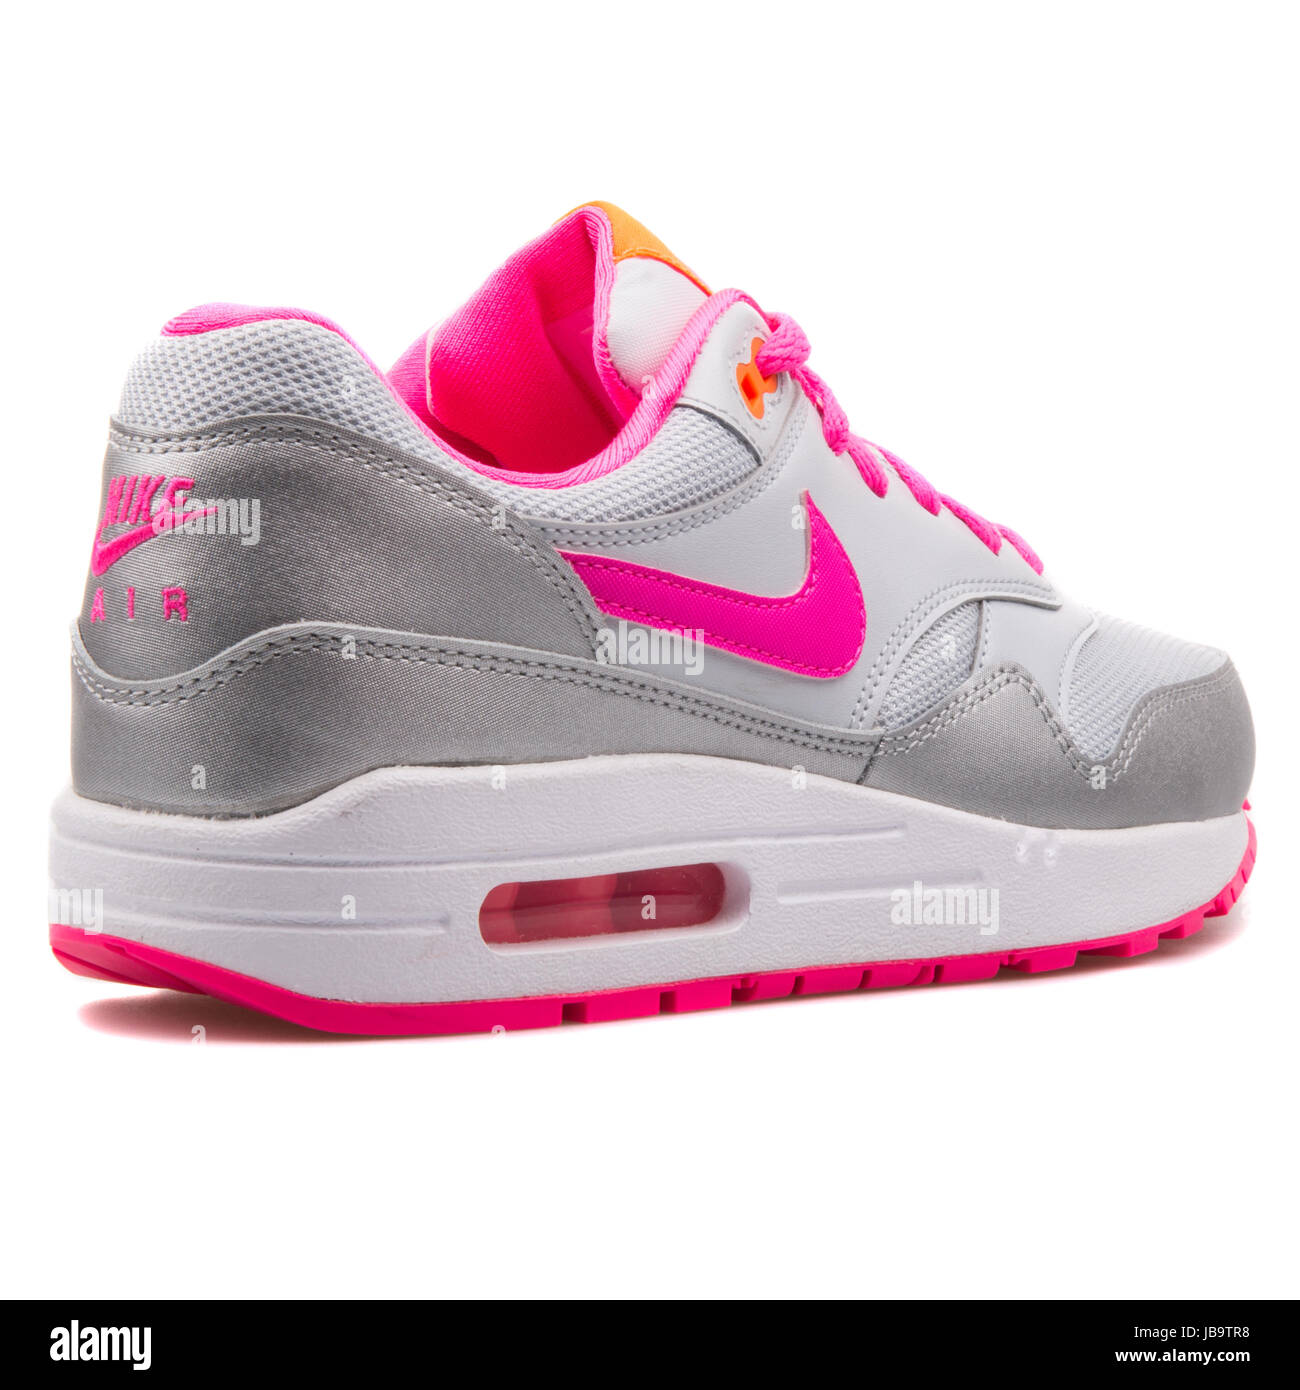 Nike Air Max 1 (GS) Silber und rosa Jugend Sport Sneaker - 653653-005 Stockfoto